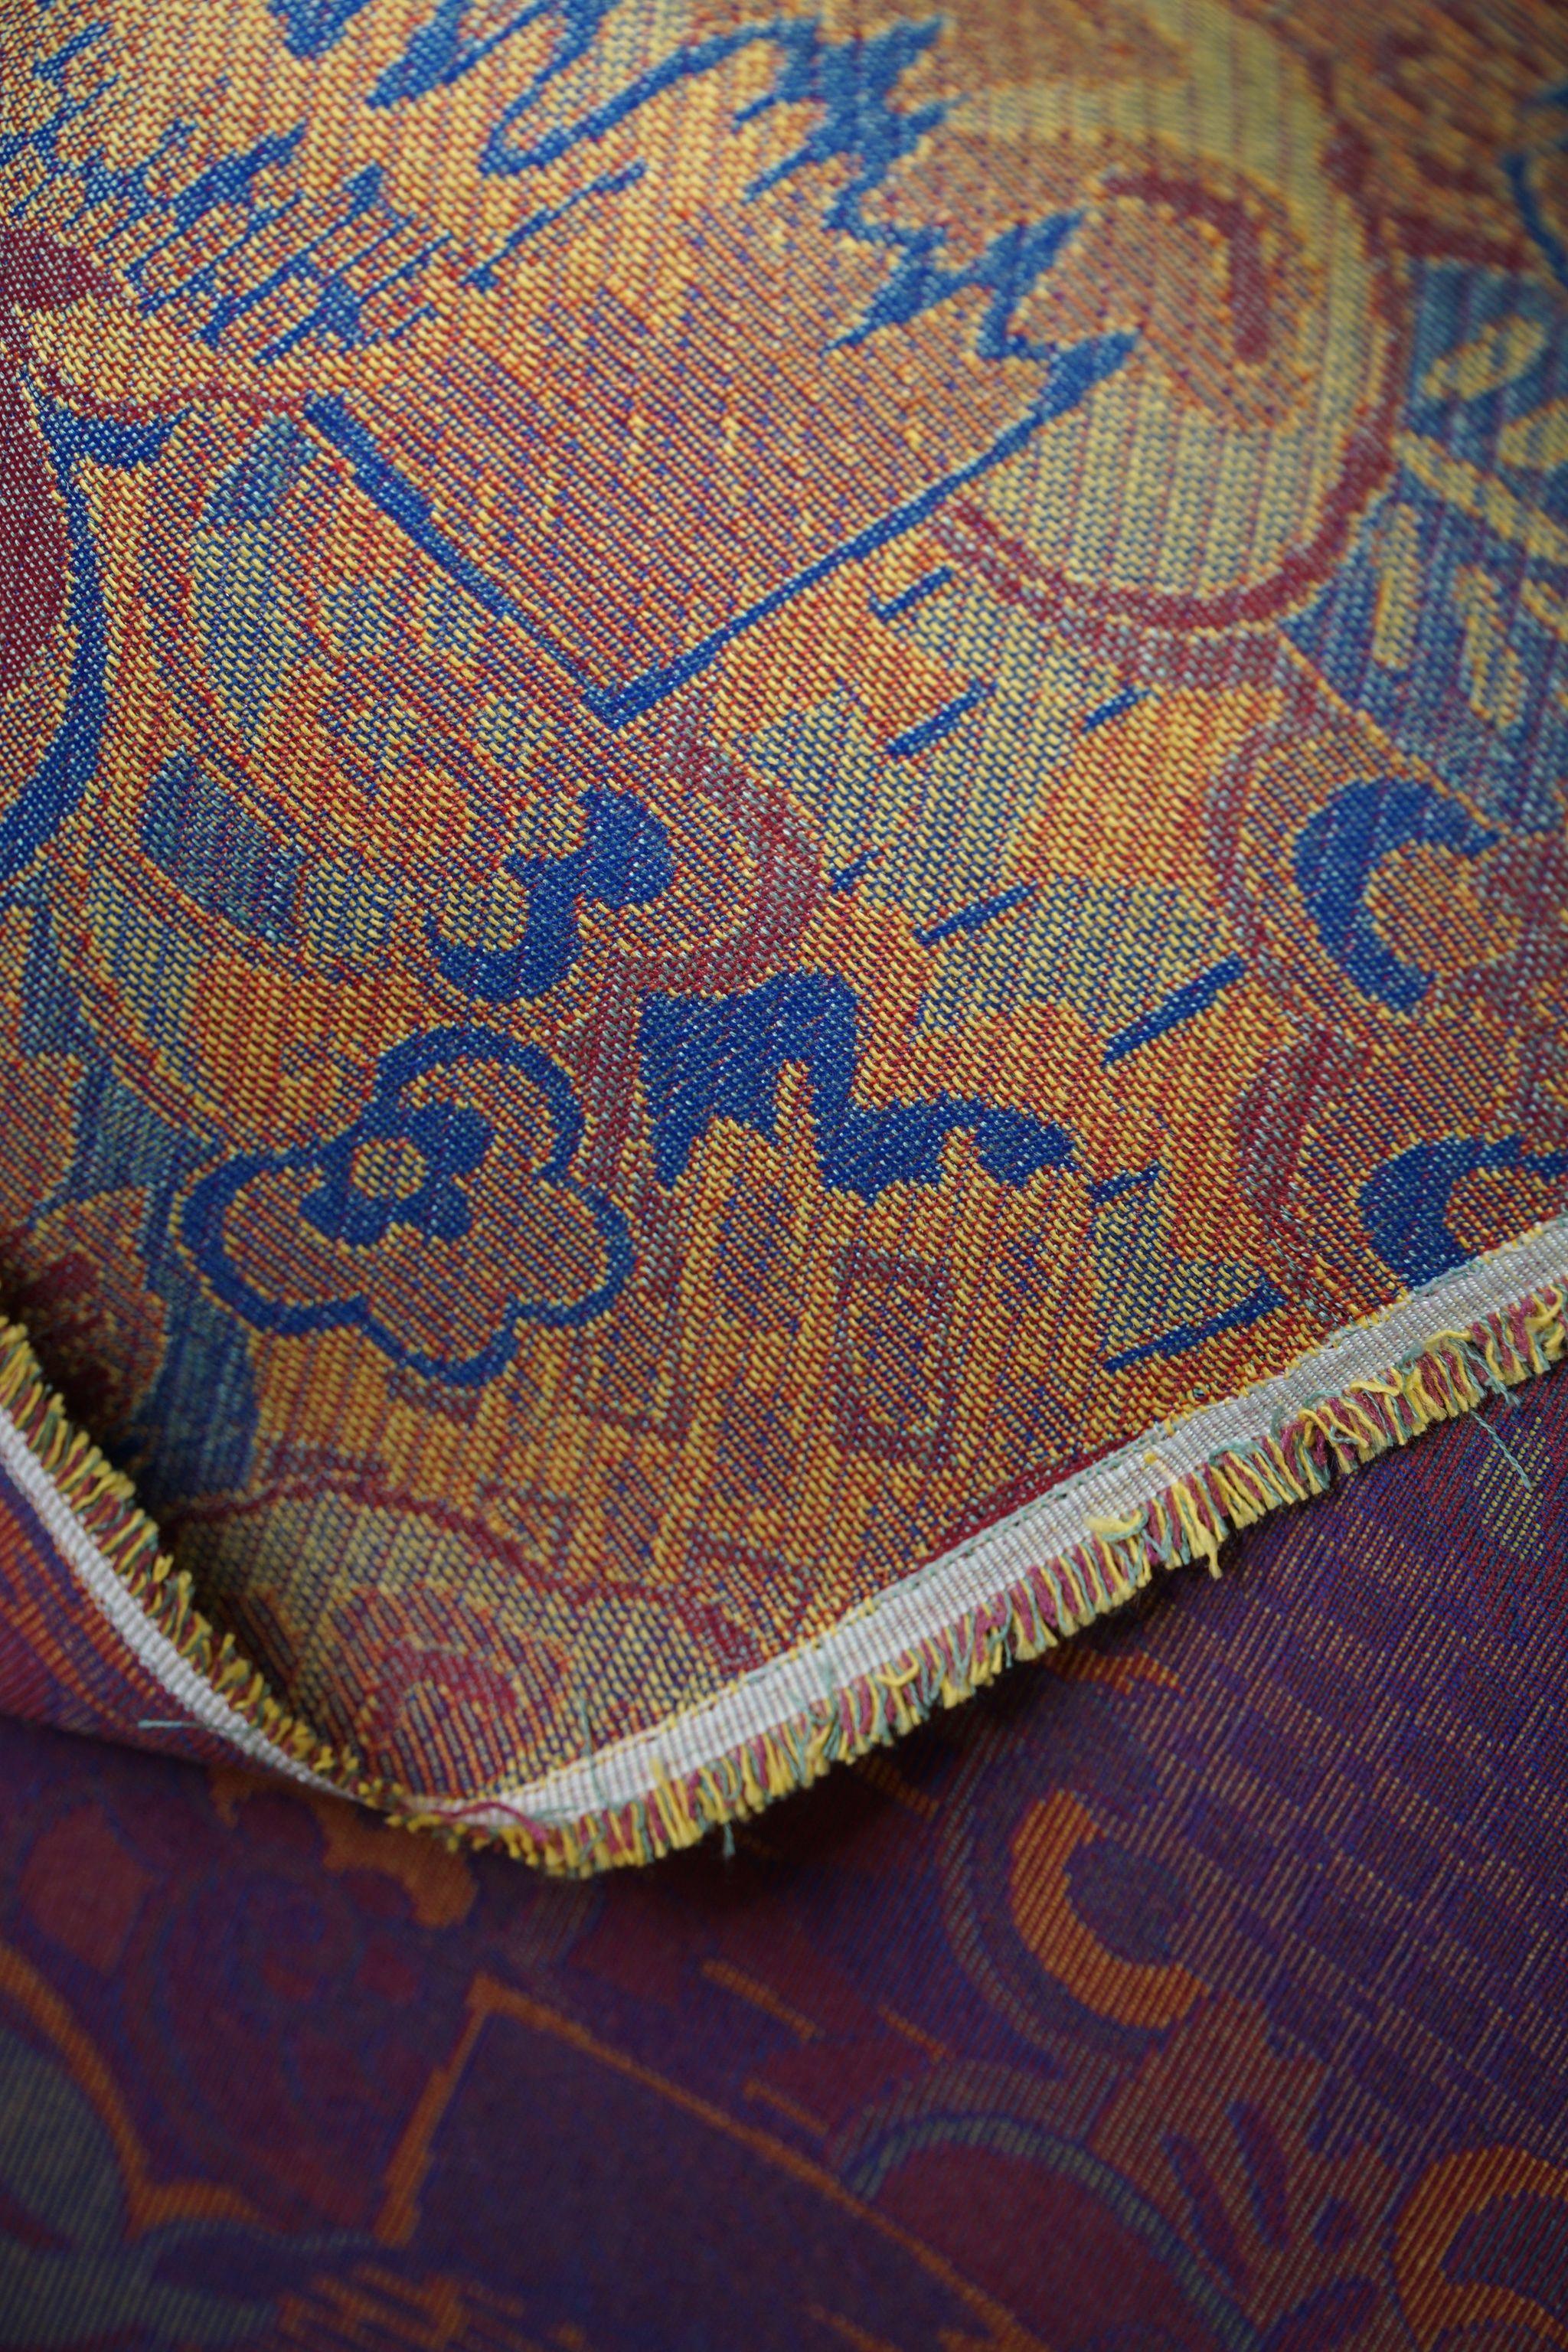 Vintage Gobelin Upholstery Fabric in Various Purple & Orange Colors, Late 20th C In Excellent Condition For Sale In Odense, DK